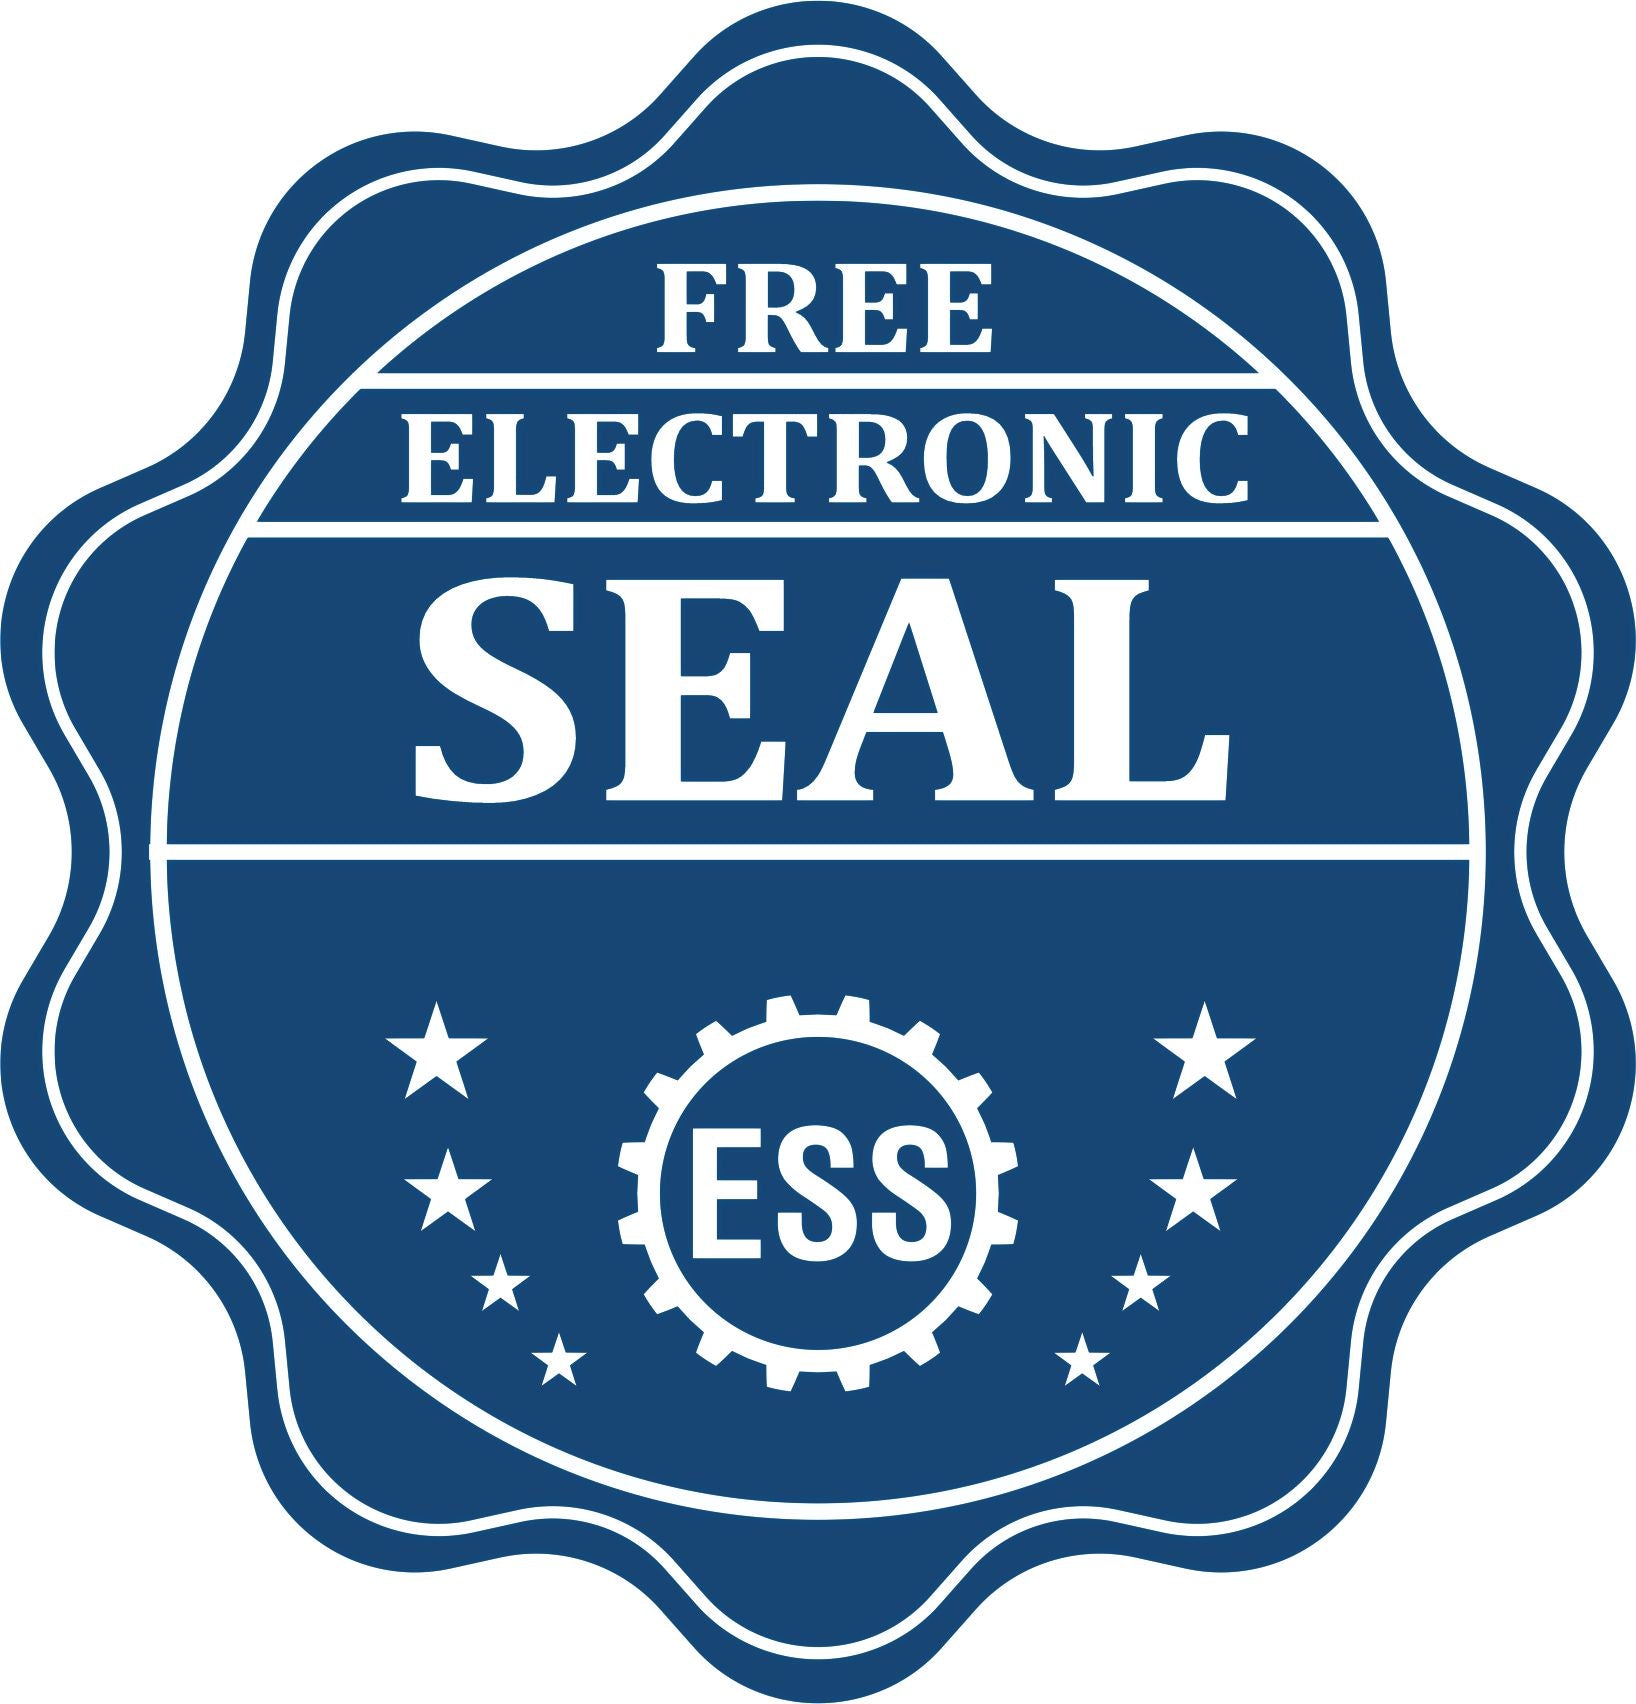 A badge showing a free electronic seal for the PSI California Notary Stamp with stars and the ESS gear on the emblem.